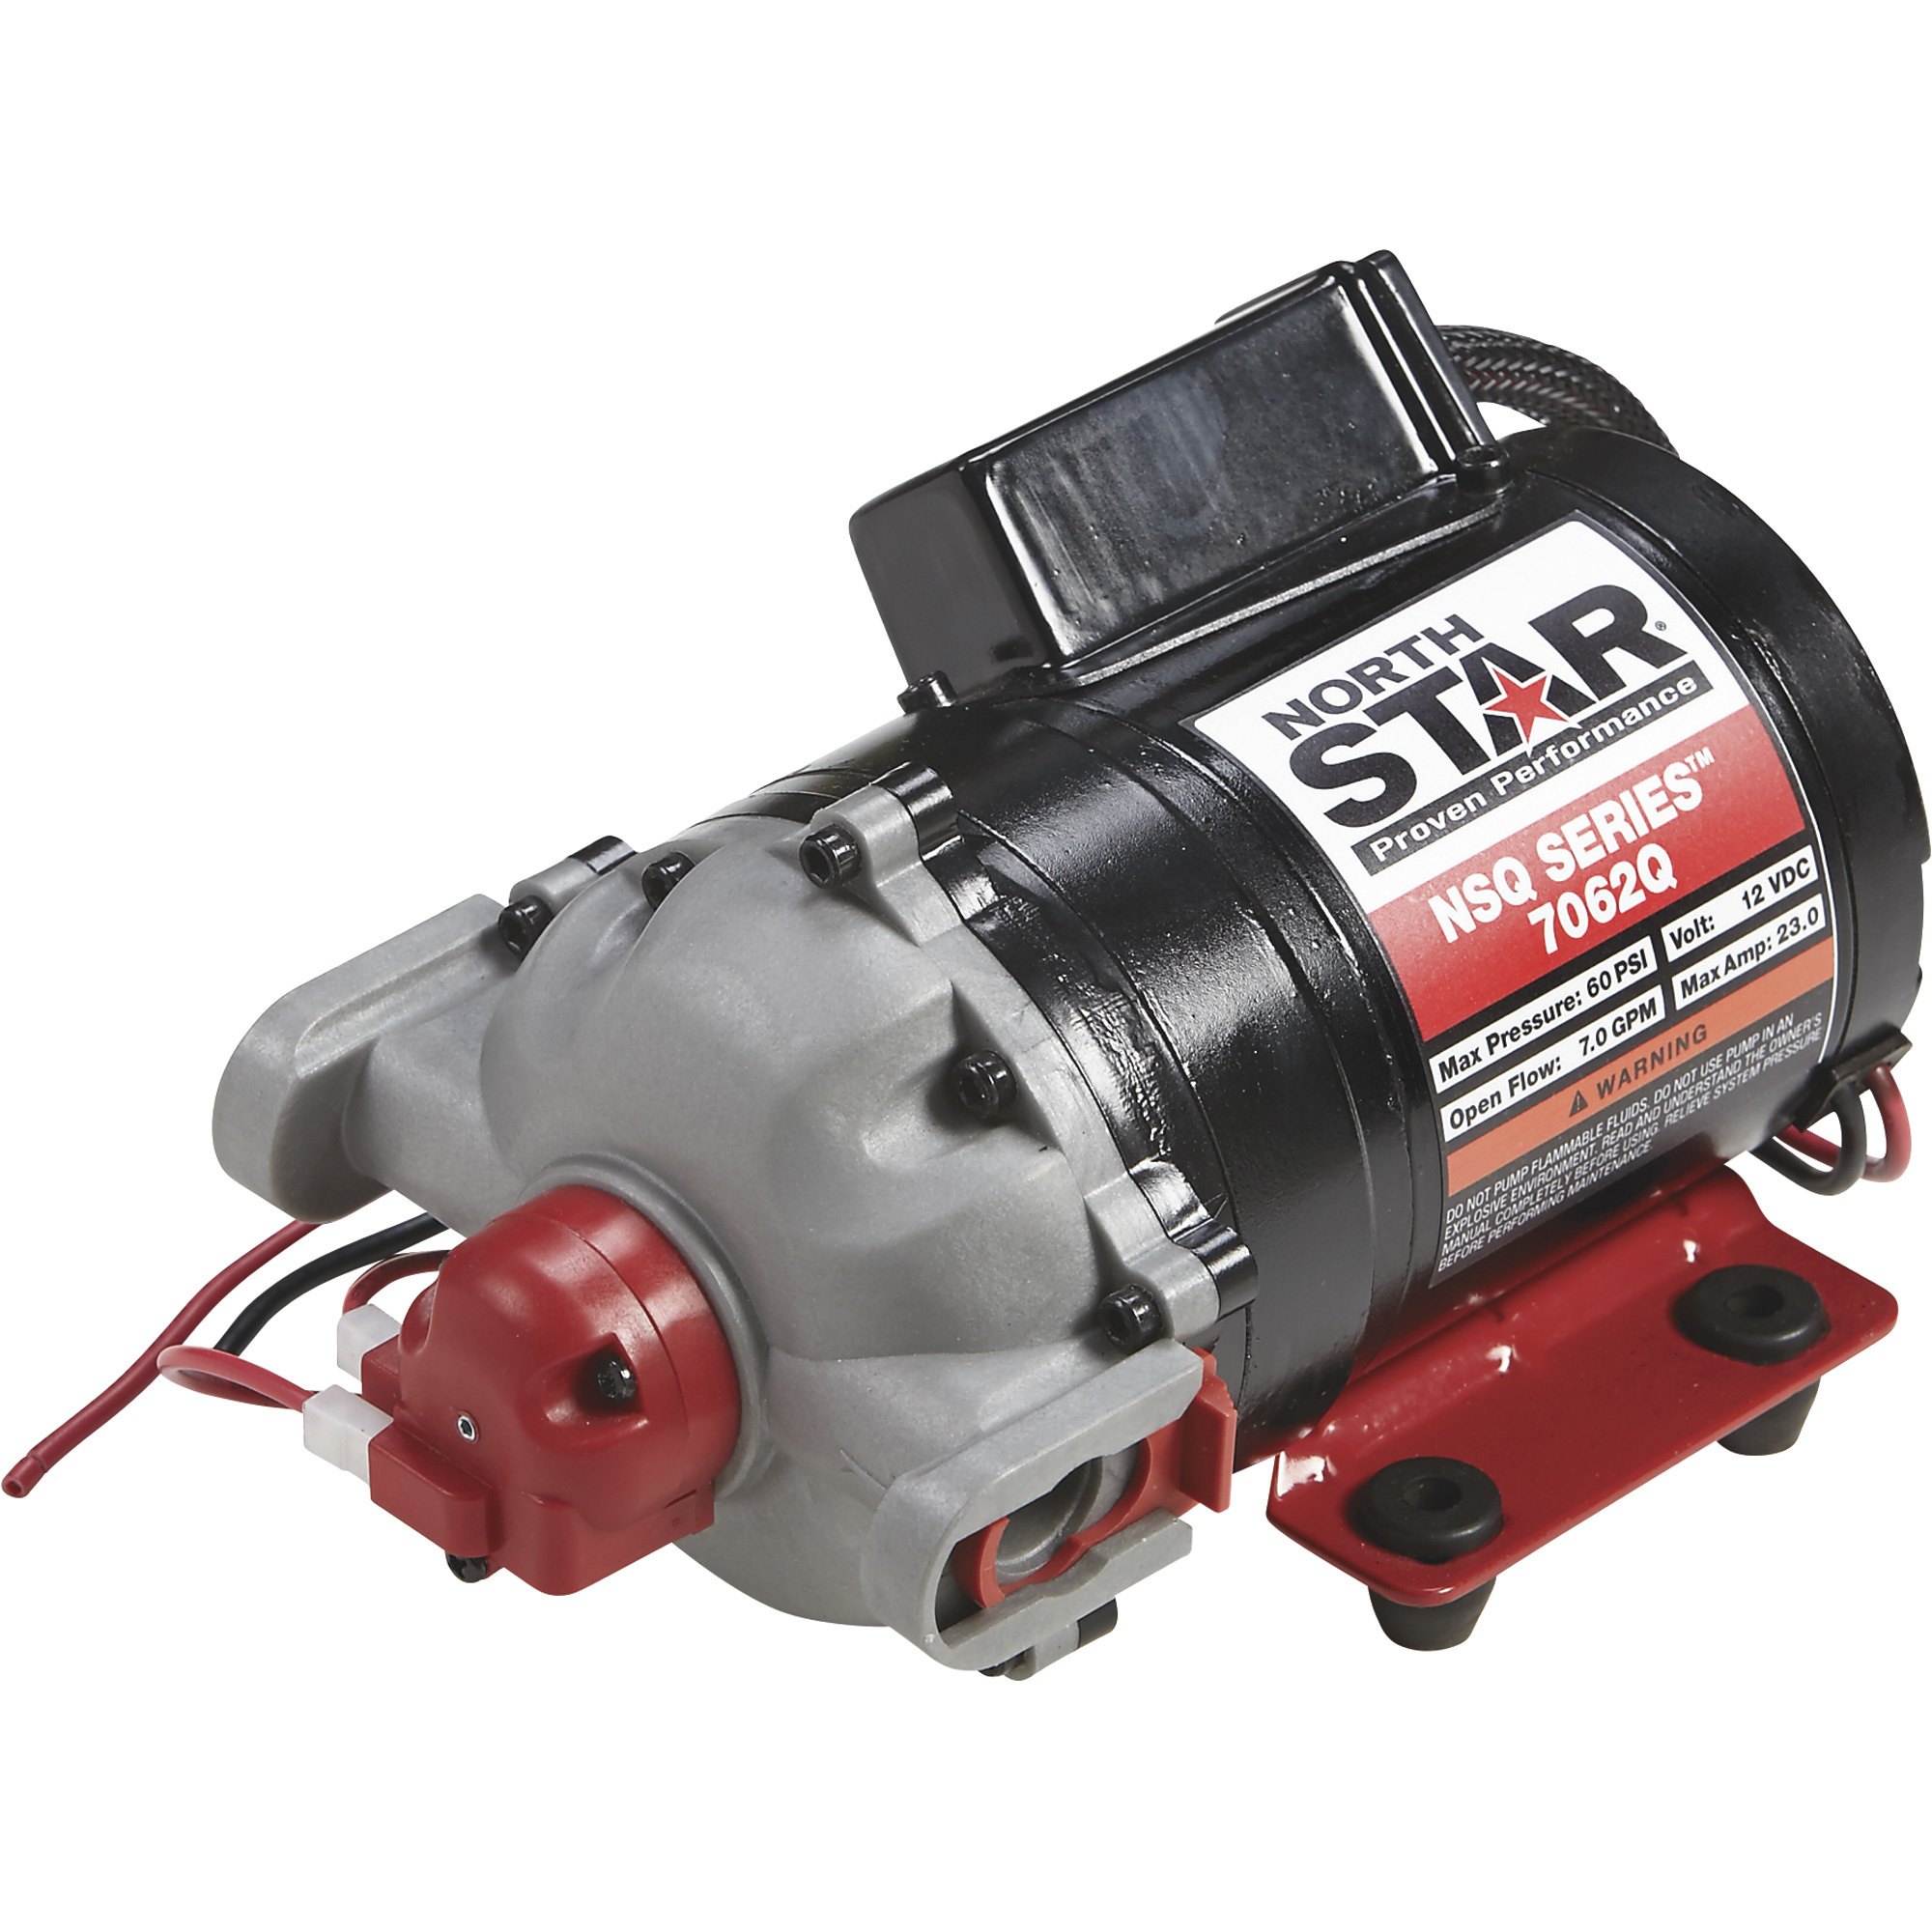 NorthStar NSQ Series 12V On-Demand Sprayer Diaphragm Pump with Quick-Connect Ports â 7.0 GPM, Turns Off @ 60 PSI